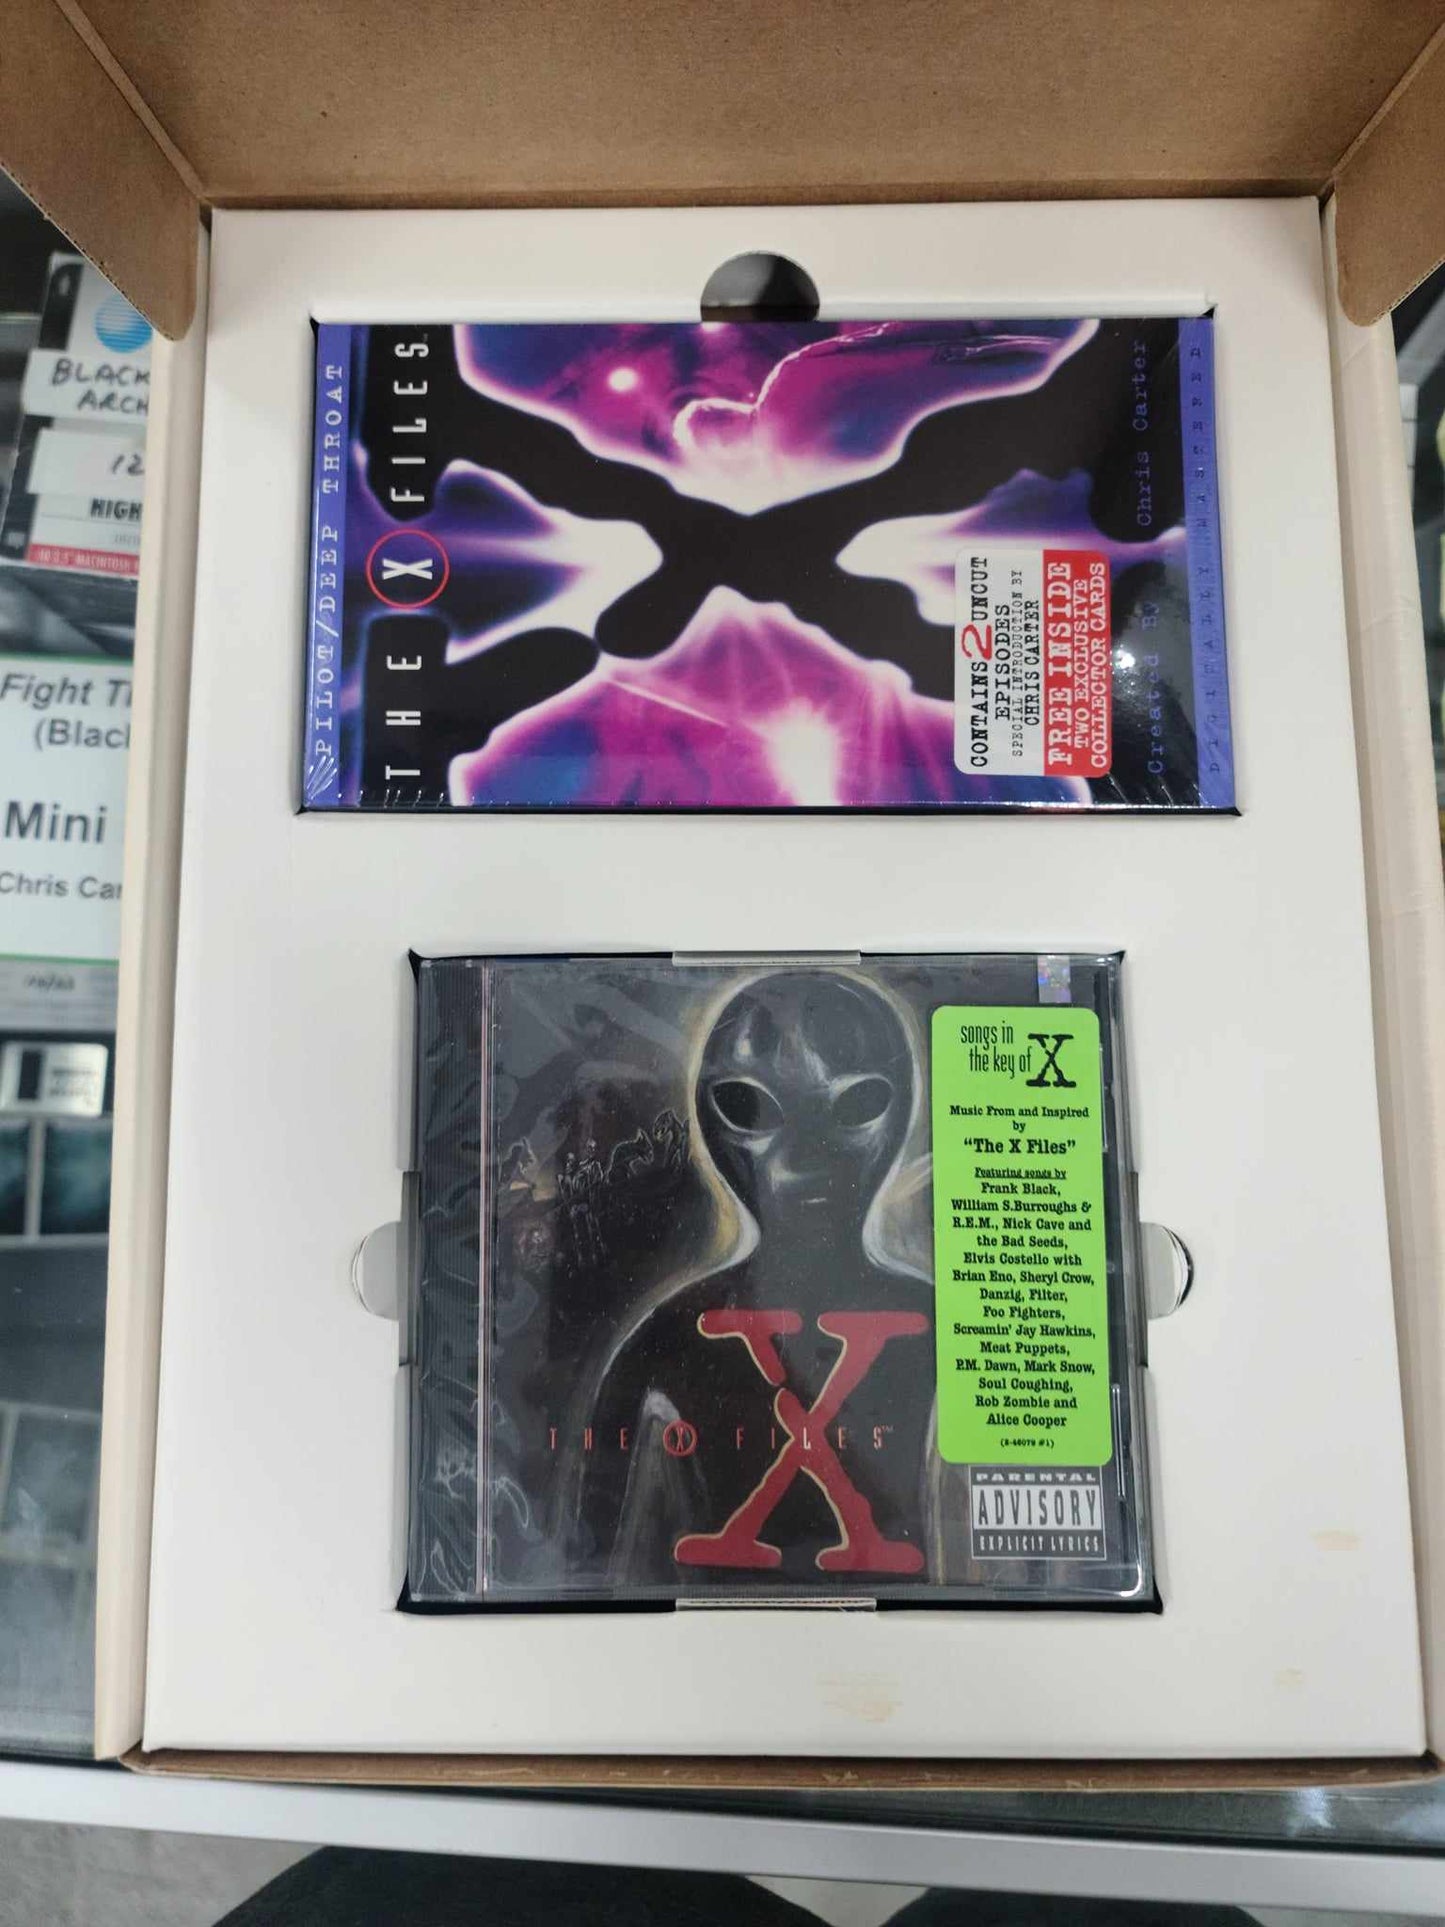 X-Files - Promotional VHS Tape (2 episodes) and Soundtrack CD